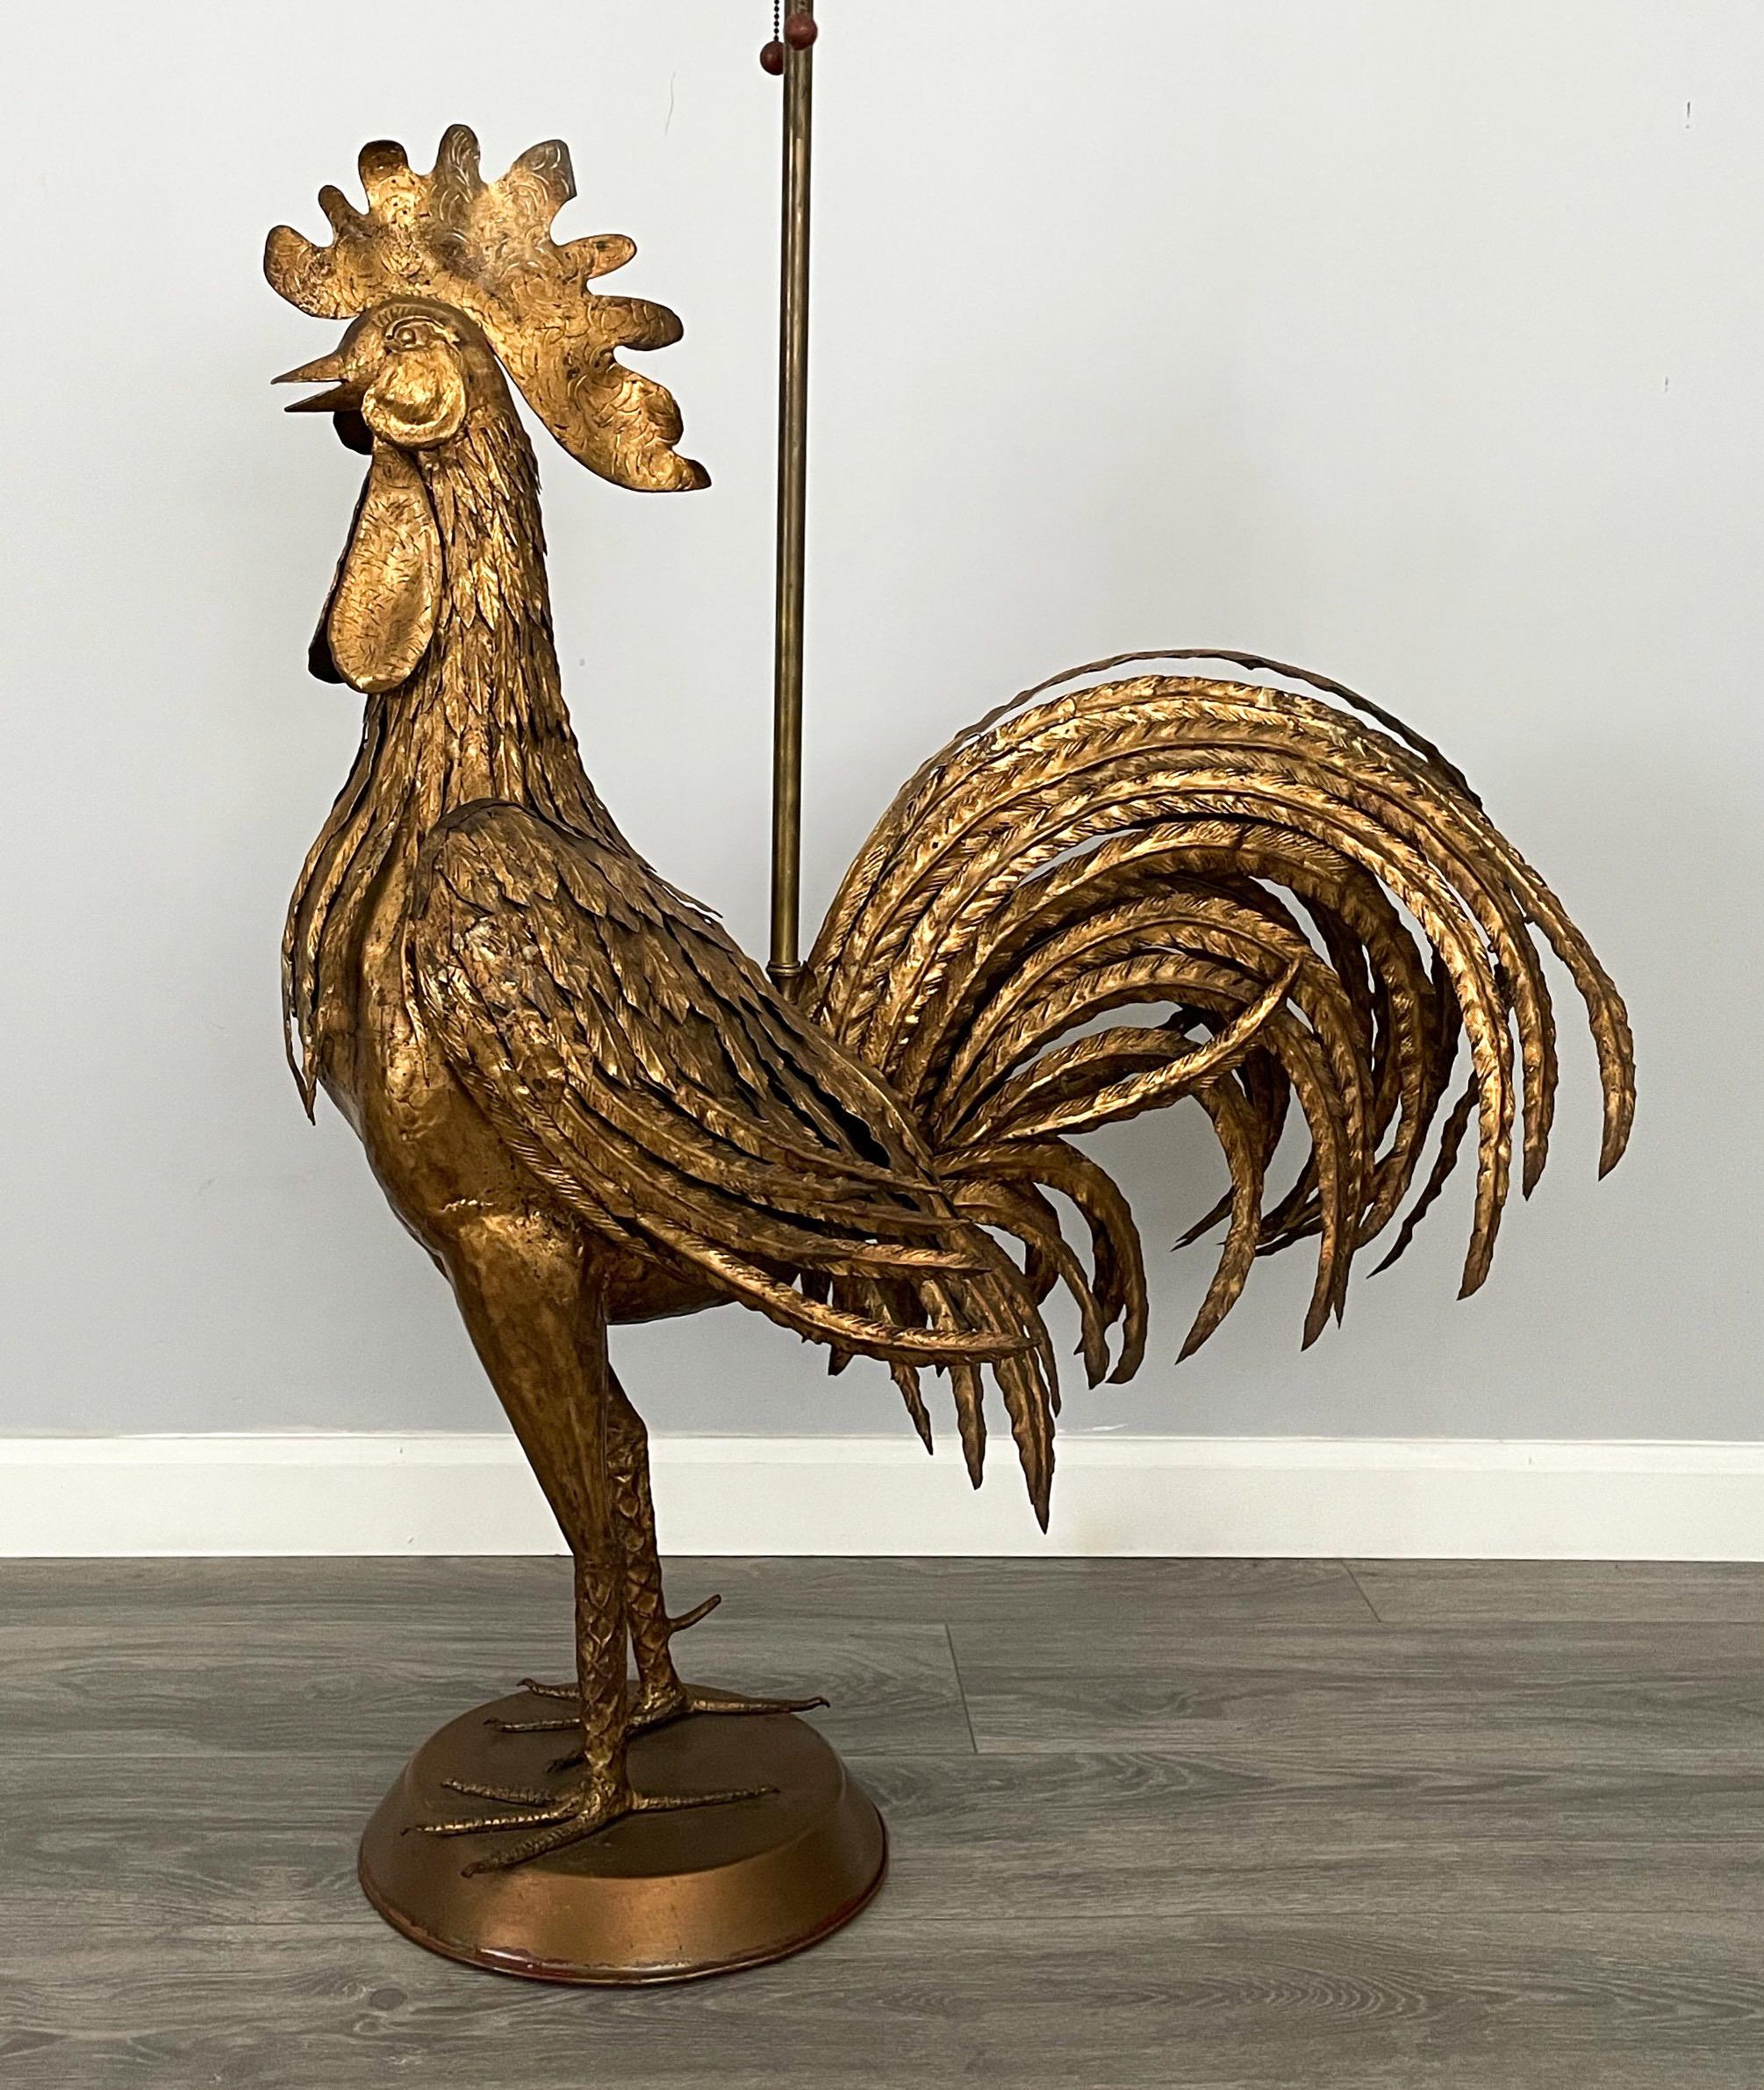 Handsome, Italian 1960s gilt iron floor lamp in the shape of a rooster imported by the Marbro Lamp Company, Los Angeles. 

The lamp consists of a intricately-detailed gilded iron sculpture depicting a rooster standing on a round pedestal.

The